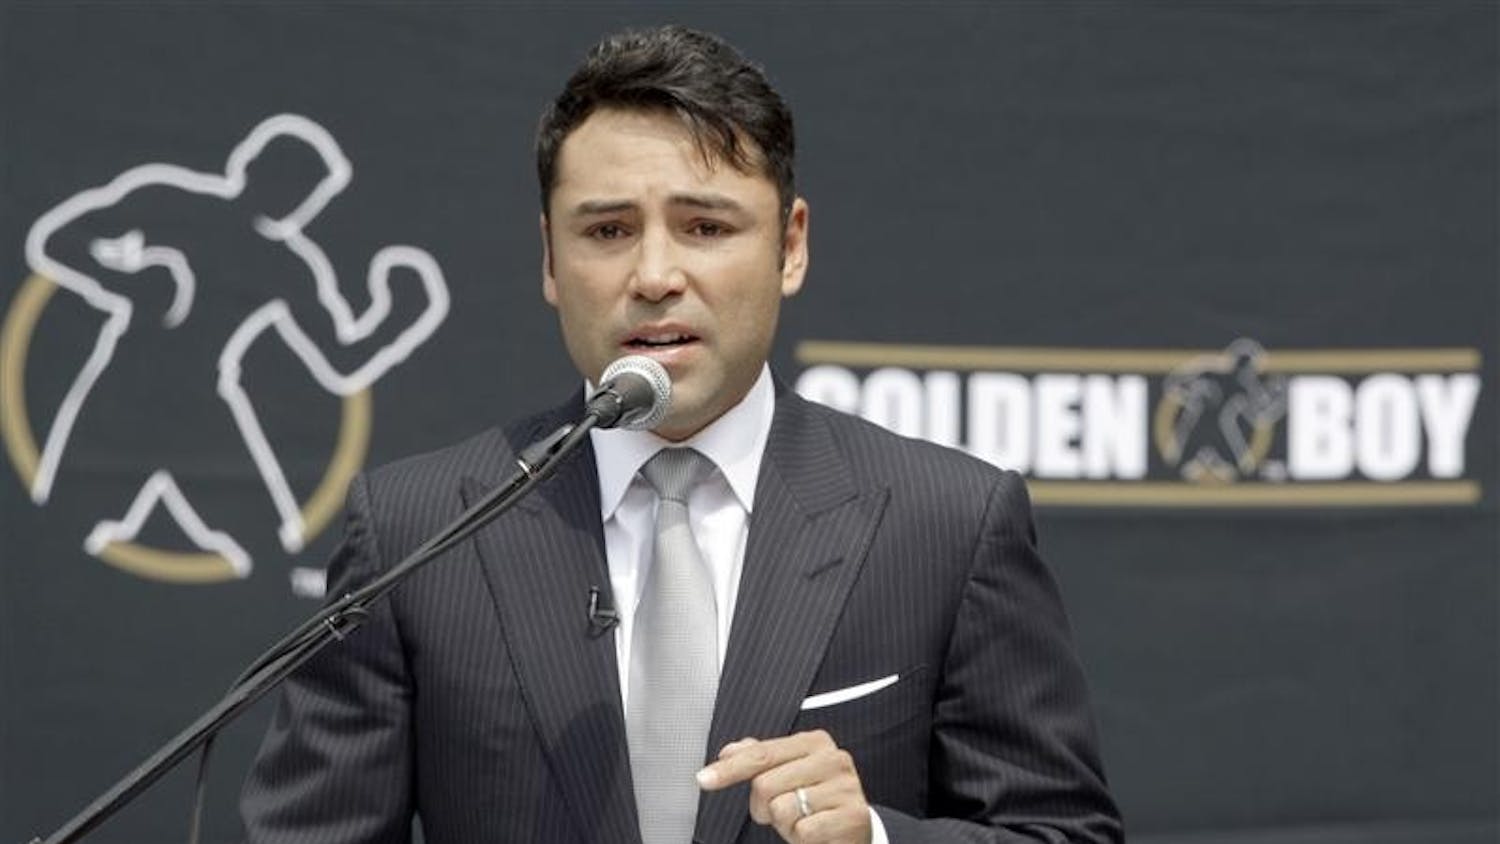 Oscar De La Hoya announces his retirement from boxing during a news conference Tuesday afternoon in Los Angeles.